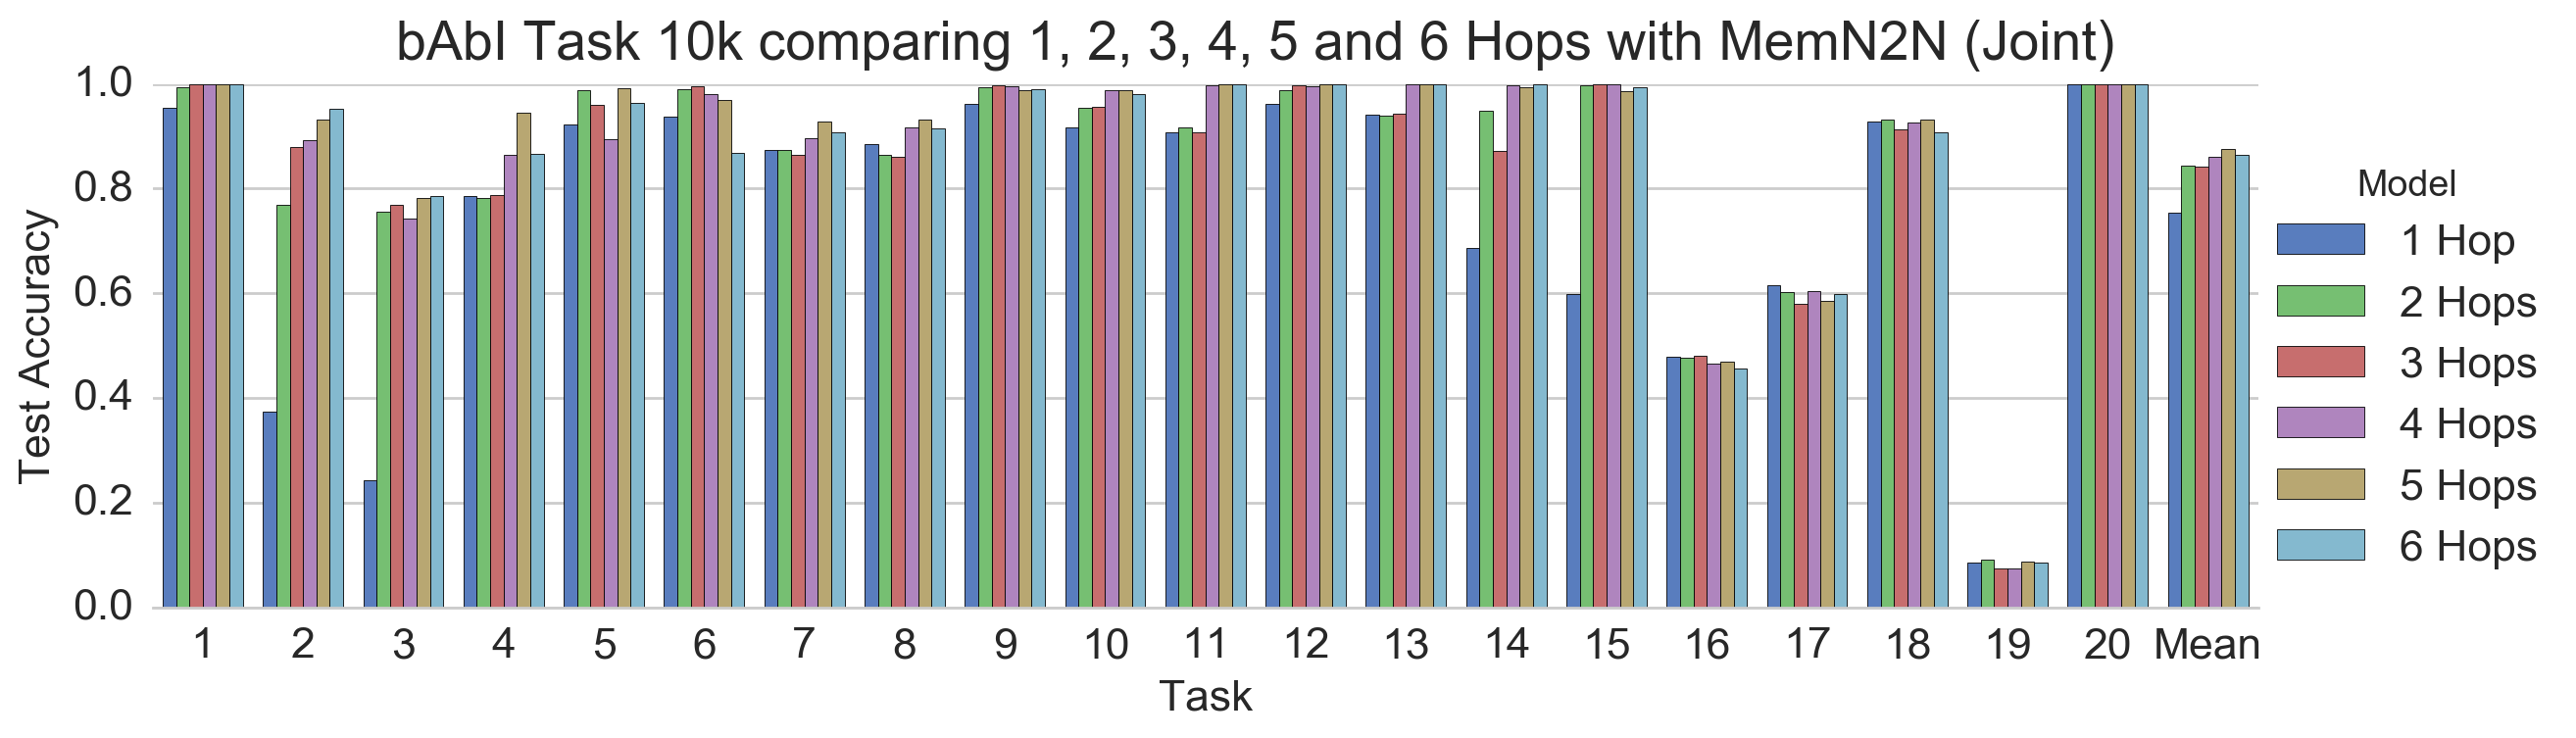 bAbI Task 10k comparing 1, 2, 3, 4, 5 and 6 Hops with MemN2N (Joint)